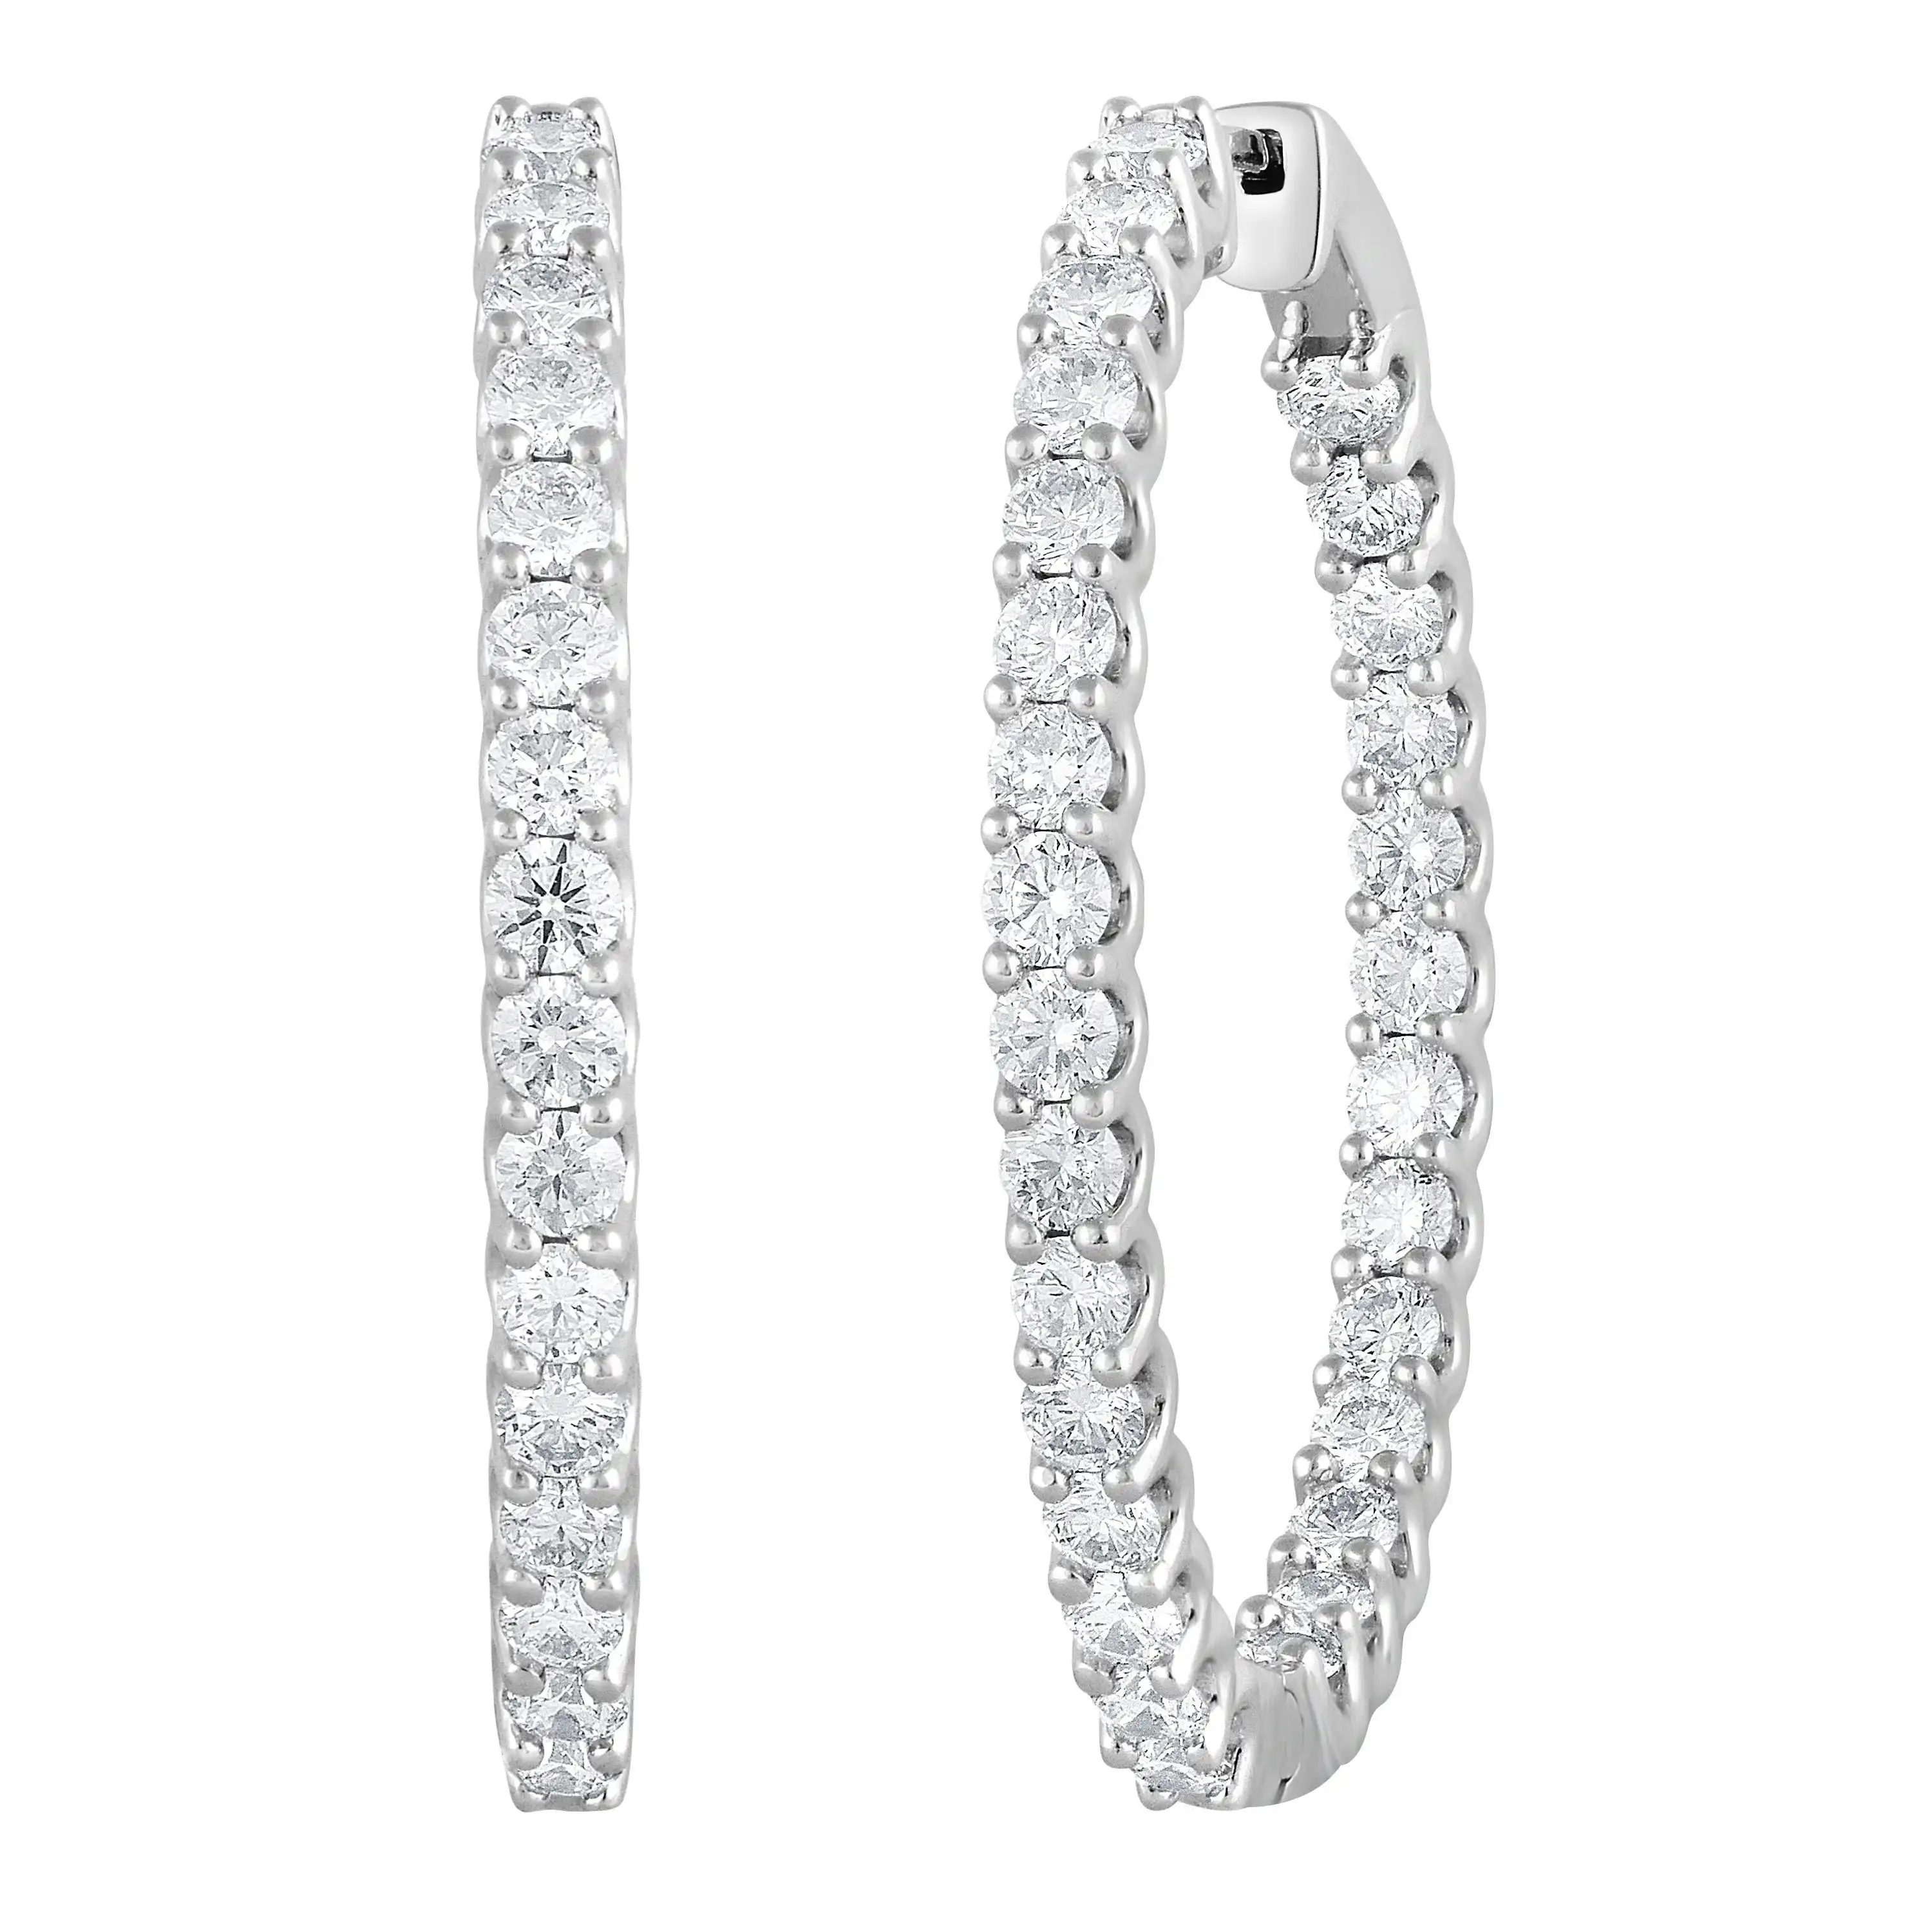 Mirage Hoop Earrings with 5.00ct of Laboratory Grown Diamonds in Sterling Silver and Platinum